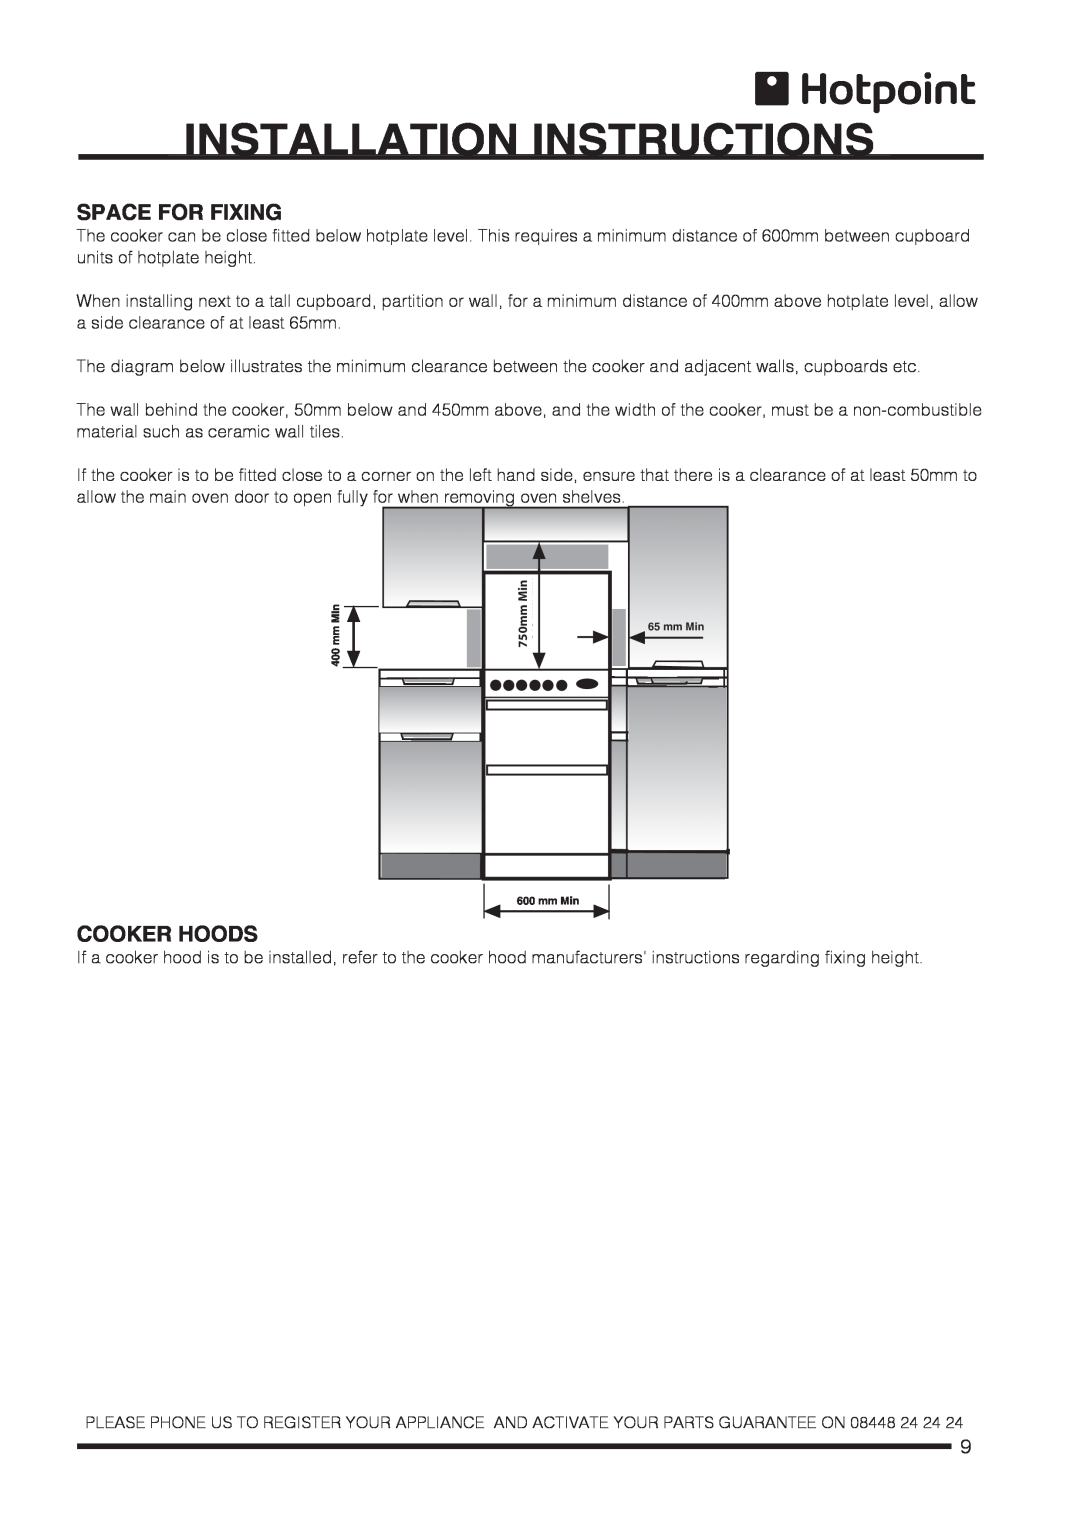 Hotpoint CH60DTCF S, CH60DPCF S, CH60DPXF S, CH60DTXFS Installation Instructions, Space For Fixing, Cooker Hoods, 750mm 